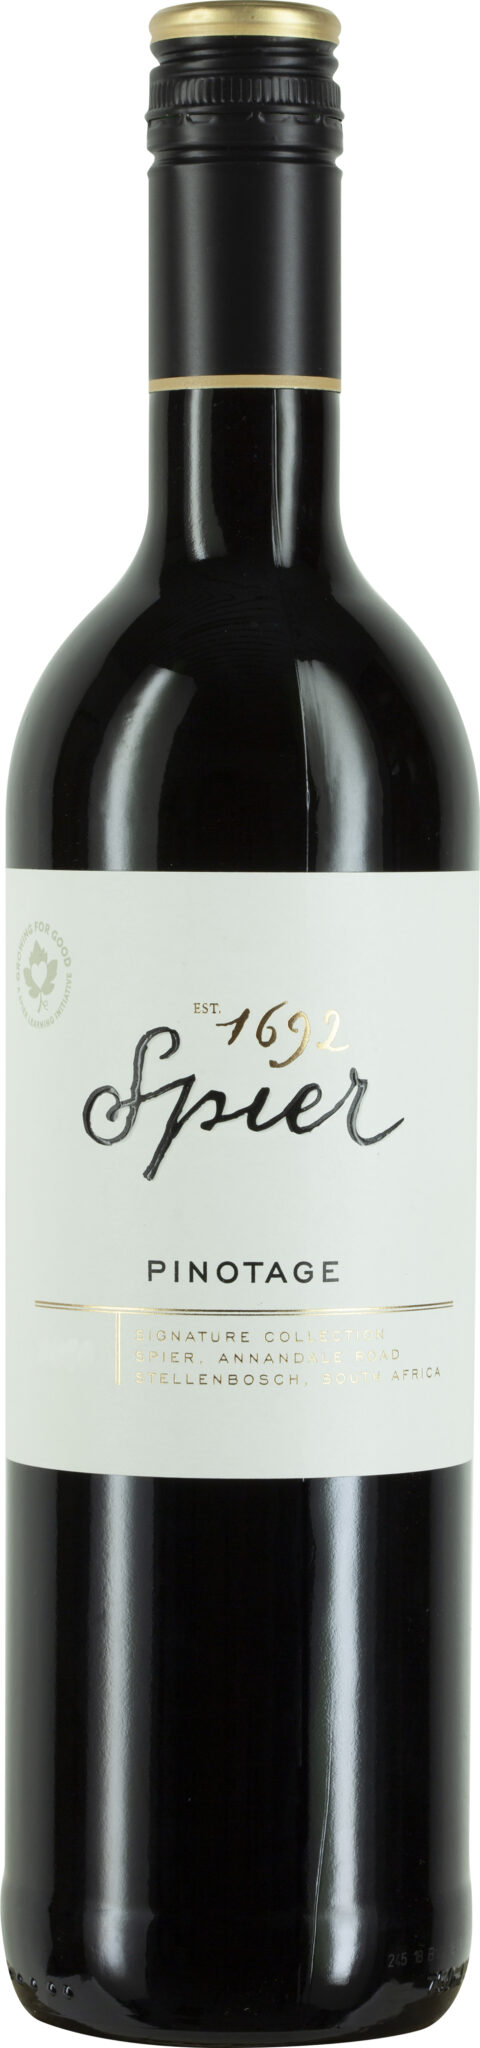 Spier Signature, Pinotage Western Cape